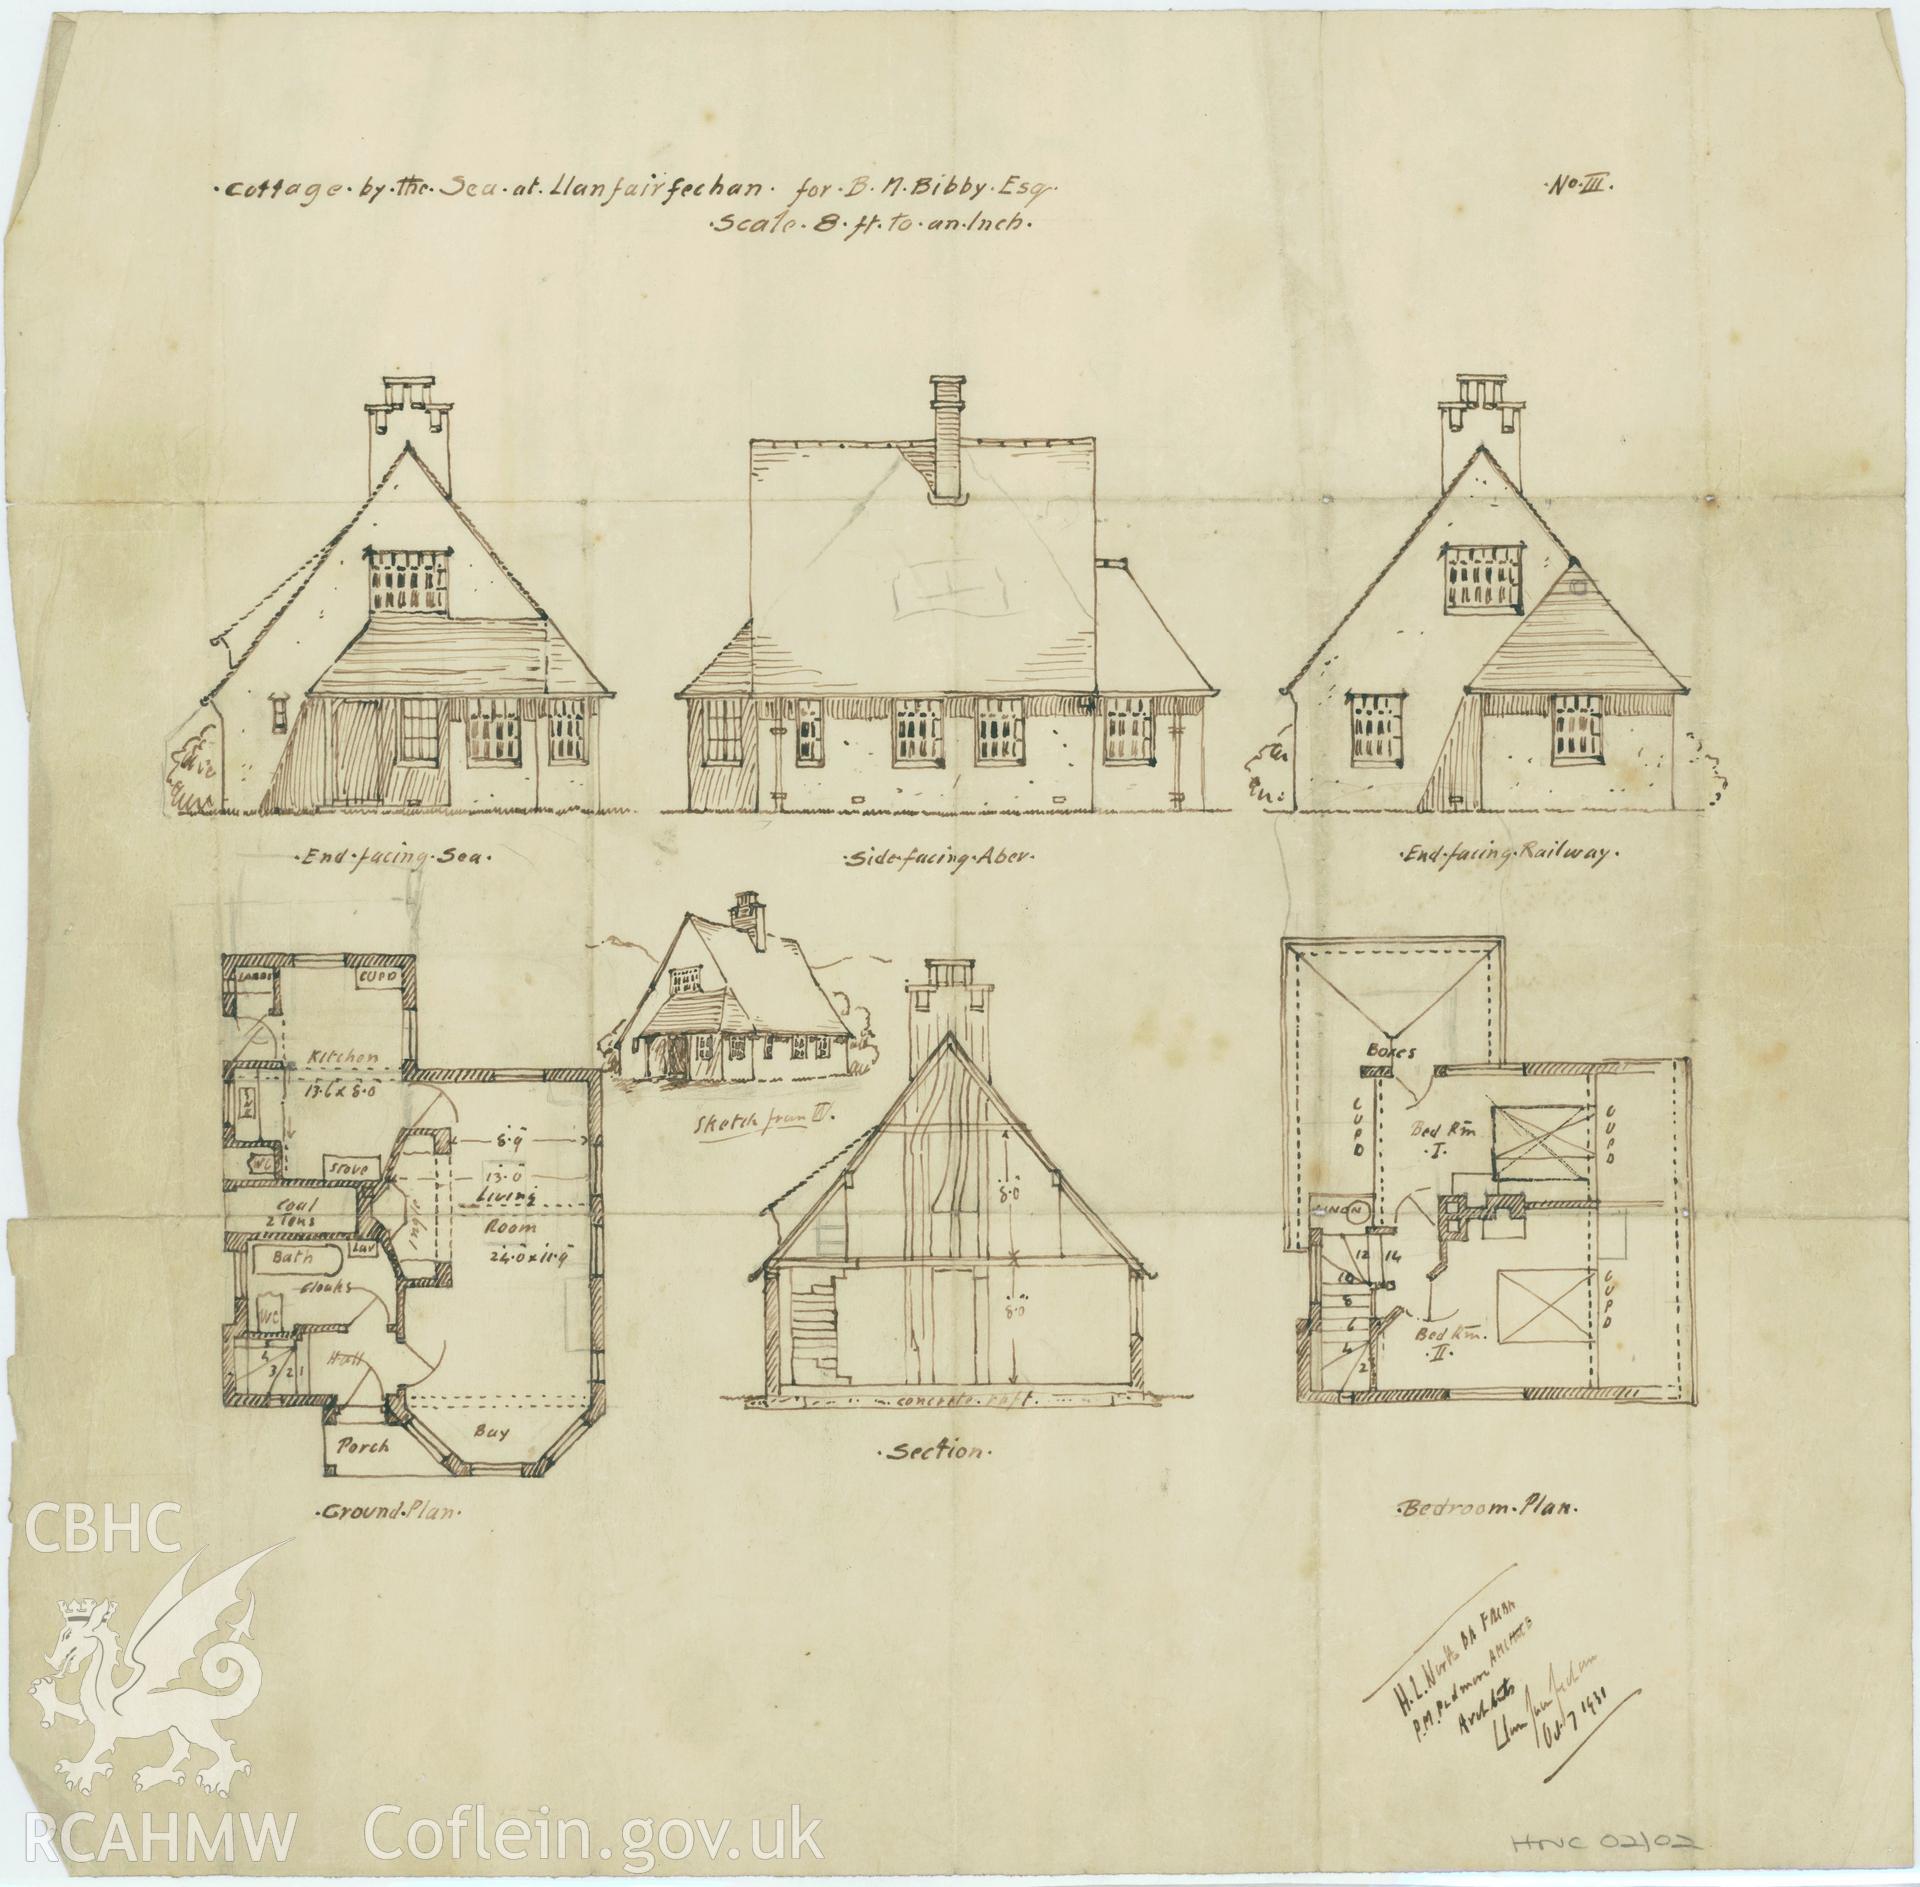 Sketch plans and elevations relating to Whitefriars, West Shore, Llanfairfechan, Conwy.